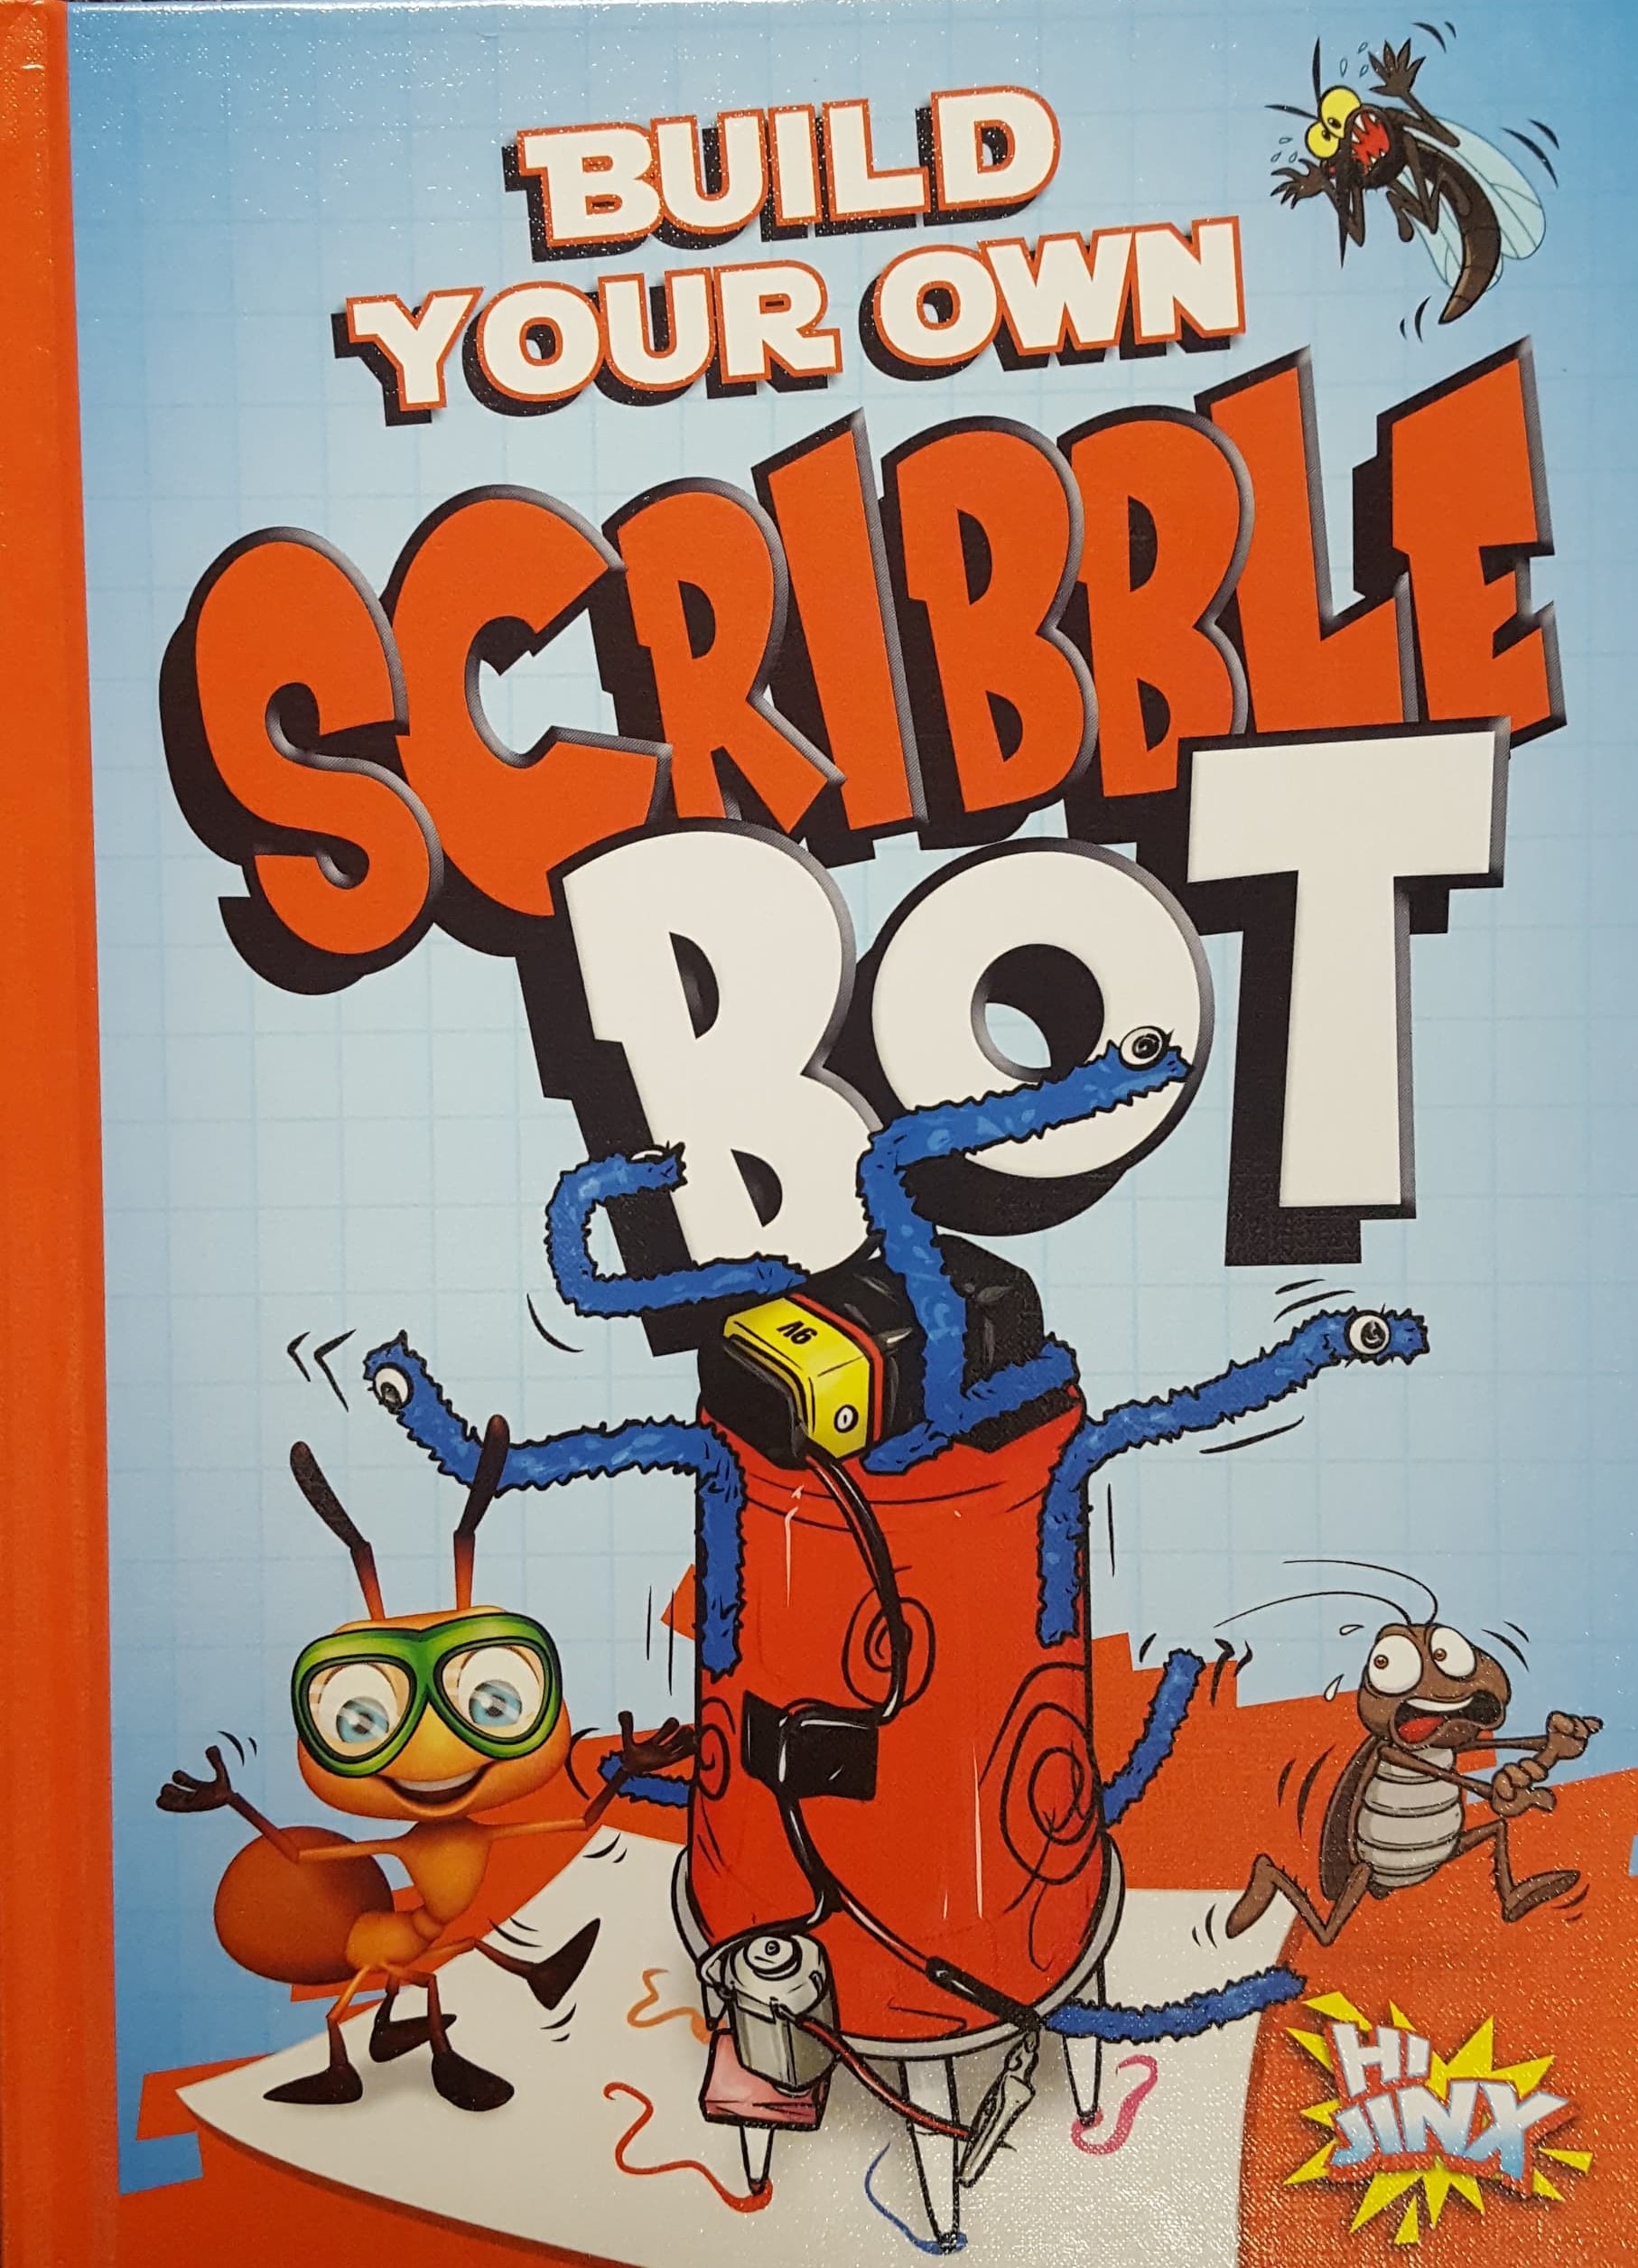 Build your own scribble bot